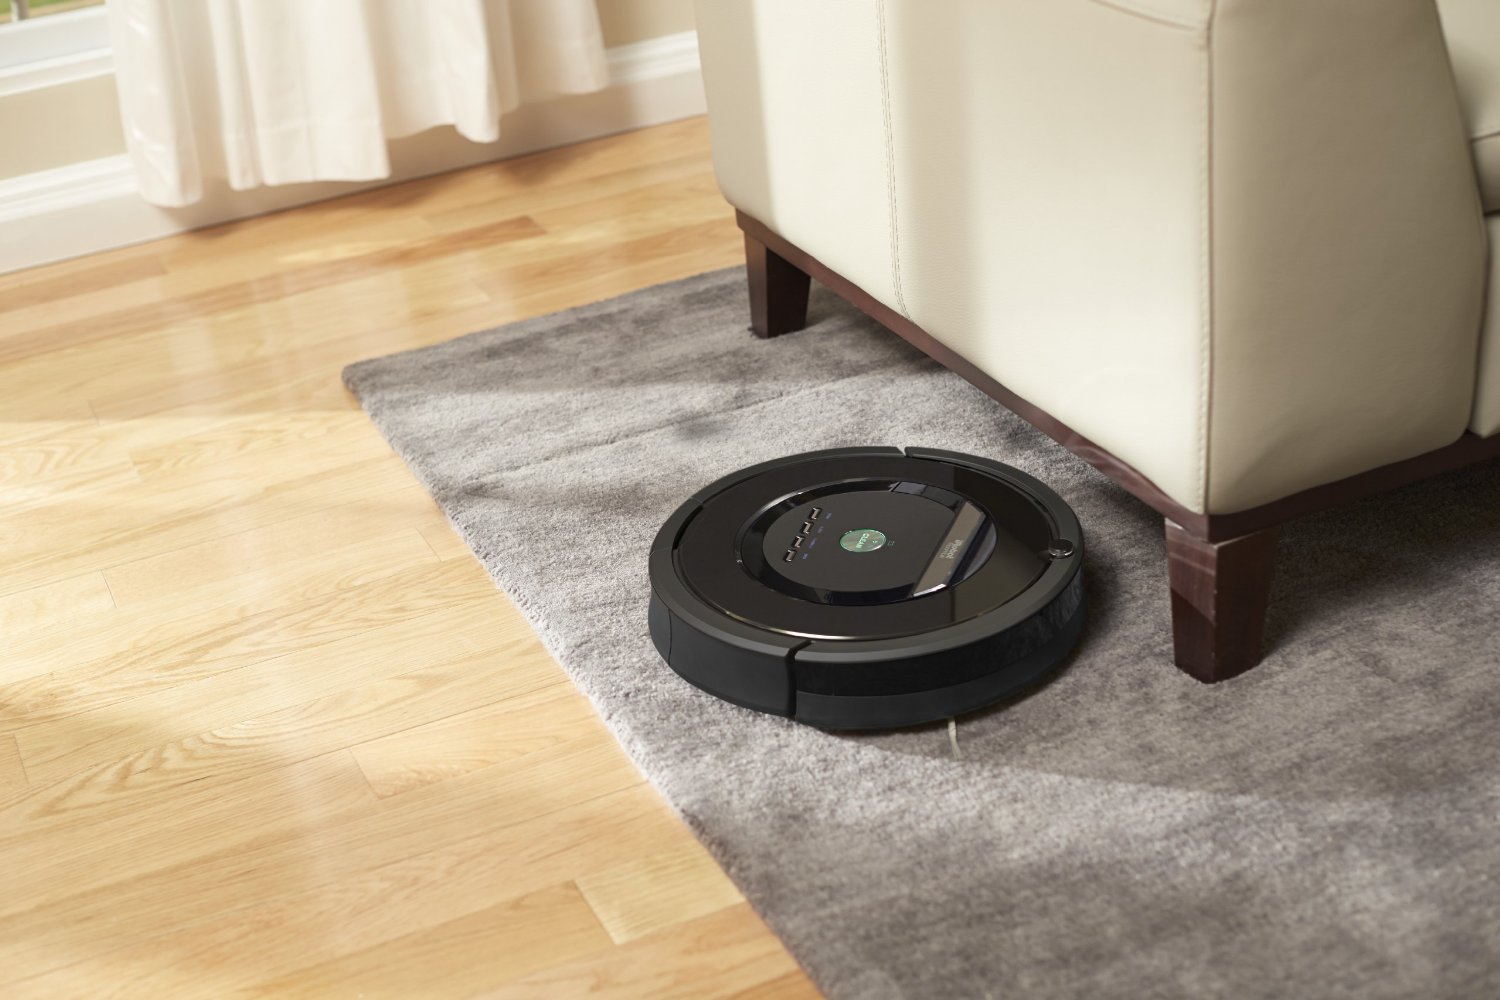 iRobot Roomba 880 Vacuum Cleaning Robot For Pets and Allergies | Animals Zone